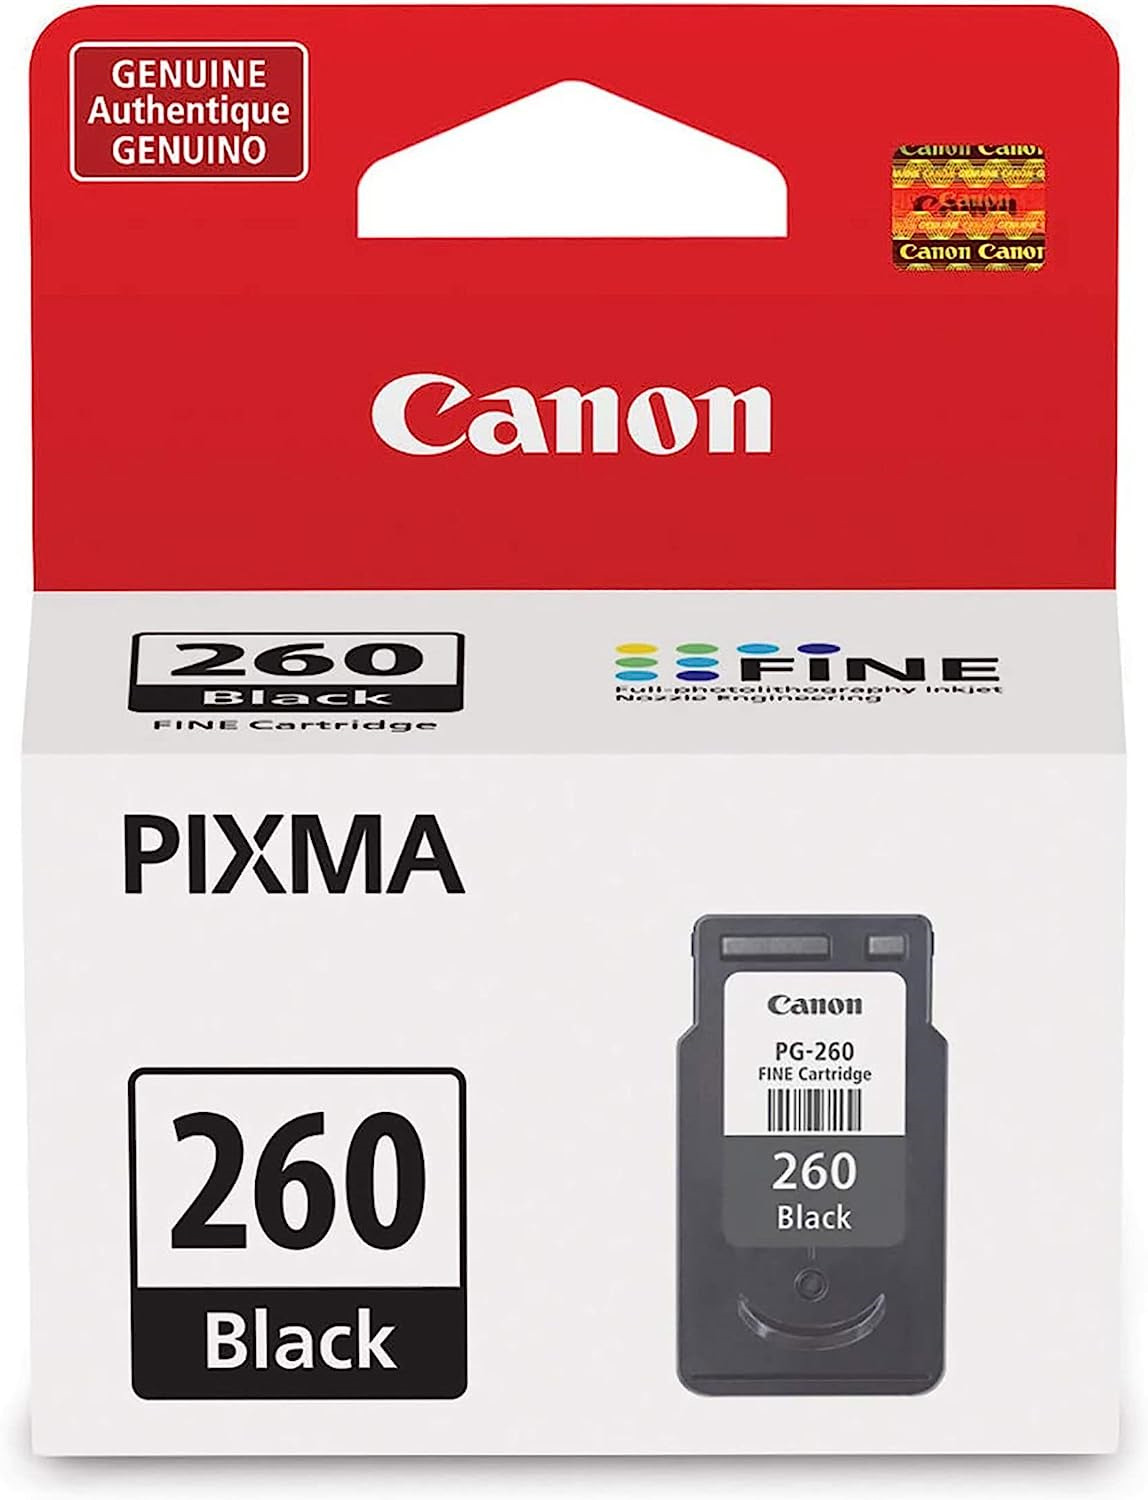 Canon PG-260 Black Ink Cartridge, Compatible to TR7020, TS6420, and TS5320